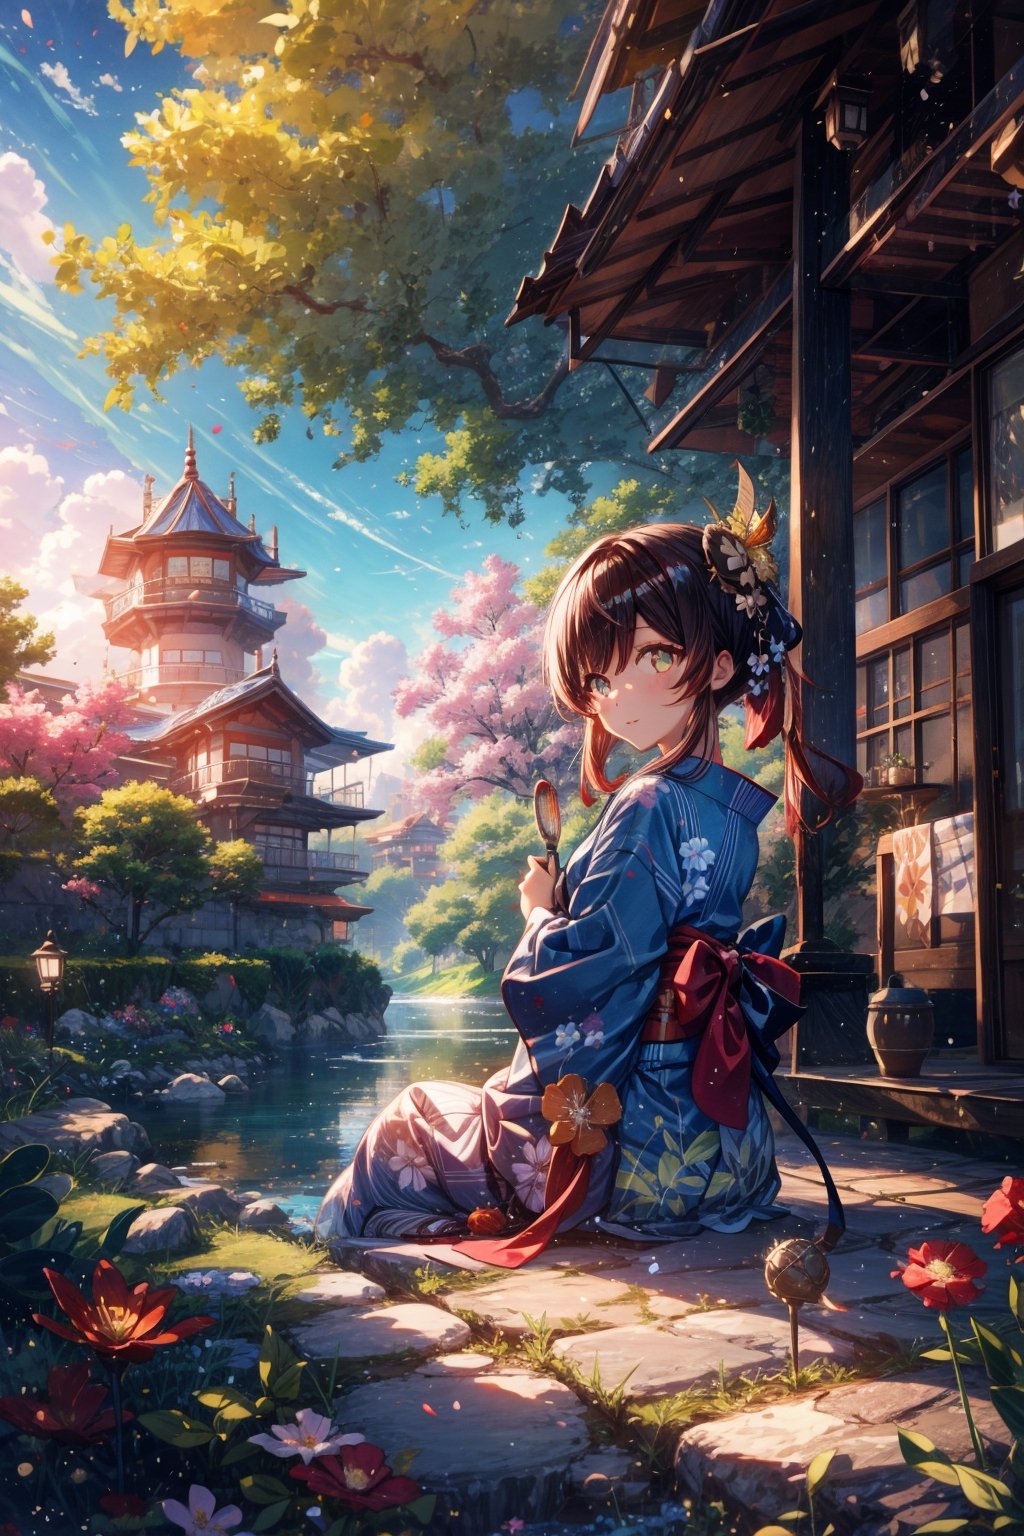 High quality, masterpiece, 1girl, shiny long red hair in a pnytail, brigth turquoise pupils, a long yukata with images of clouds and flowers, sitting under a tree and overlooking a lake,Illustration,ayaka_genshin,klee (genshin impact),wrenchmicroarch,seek,tshee00d,Futuristic room,ghostrider,dragonyear